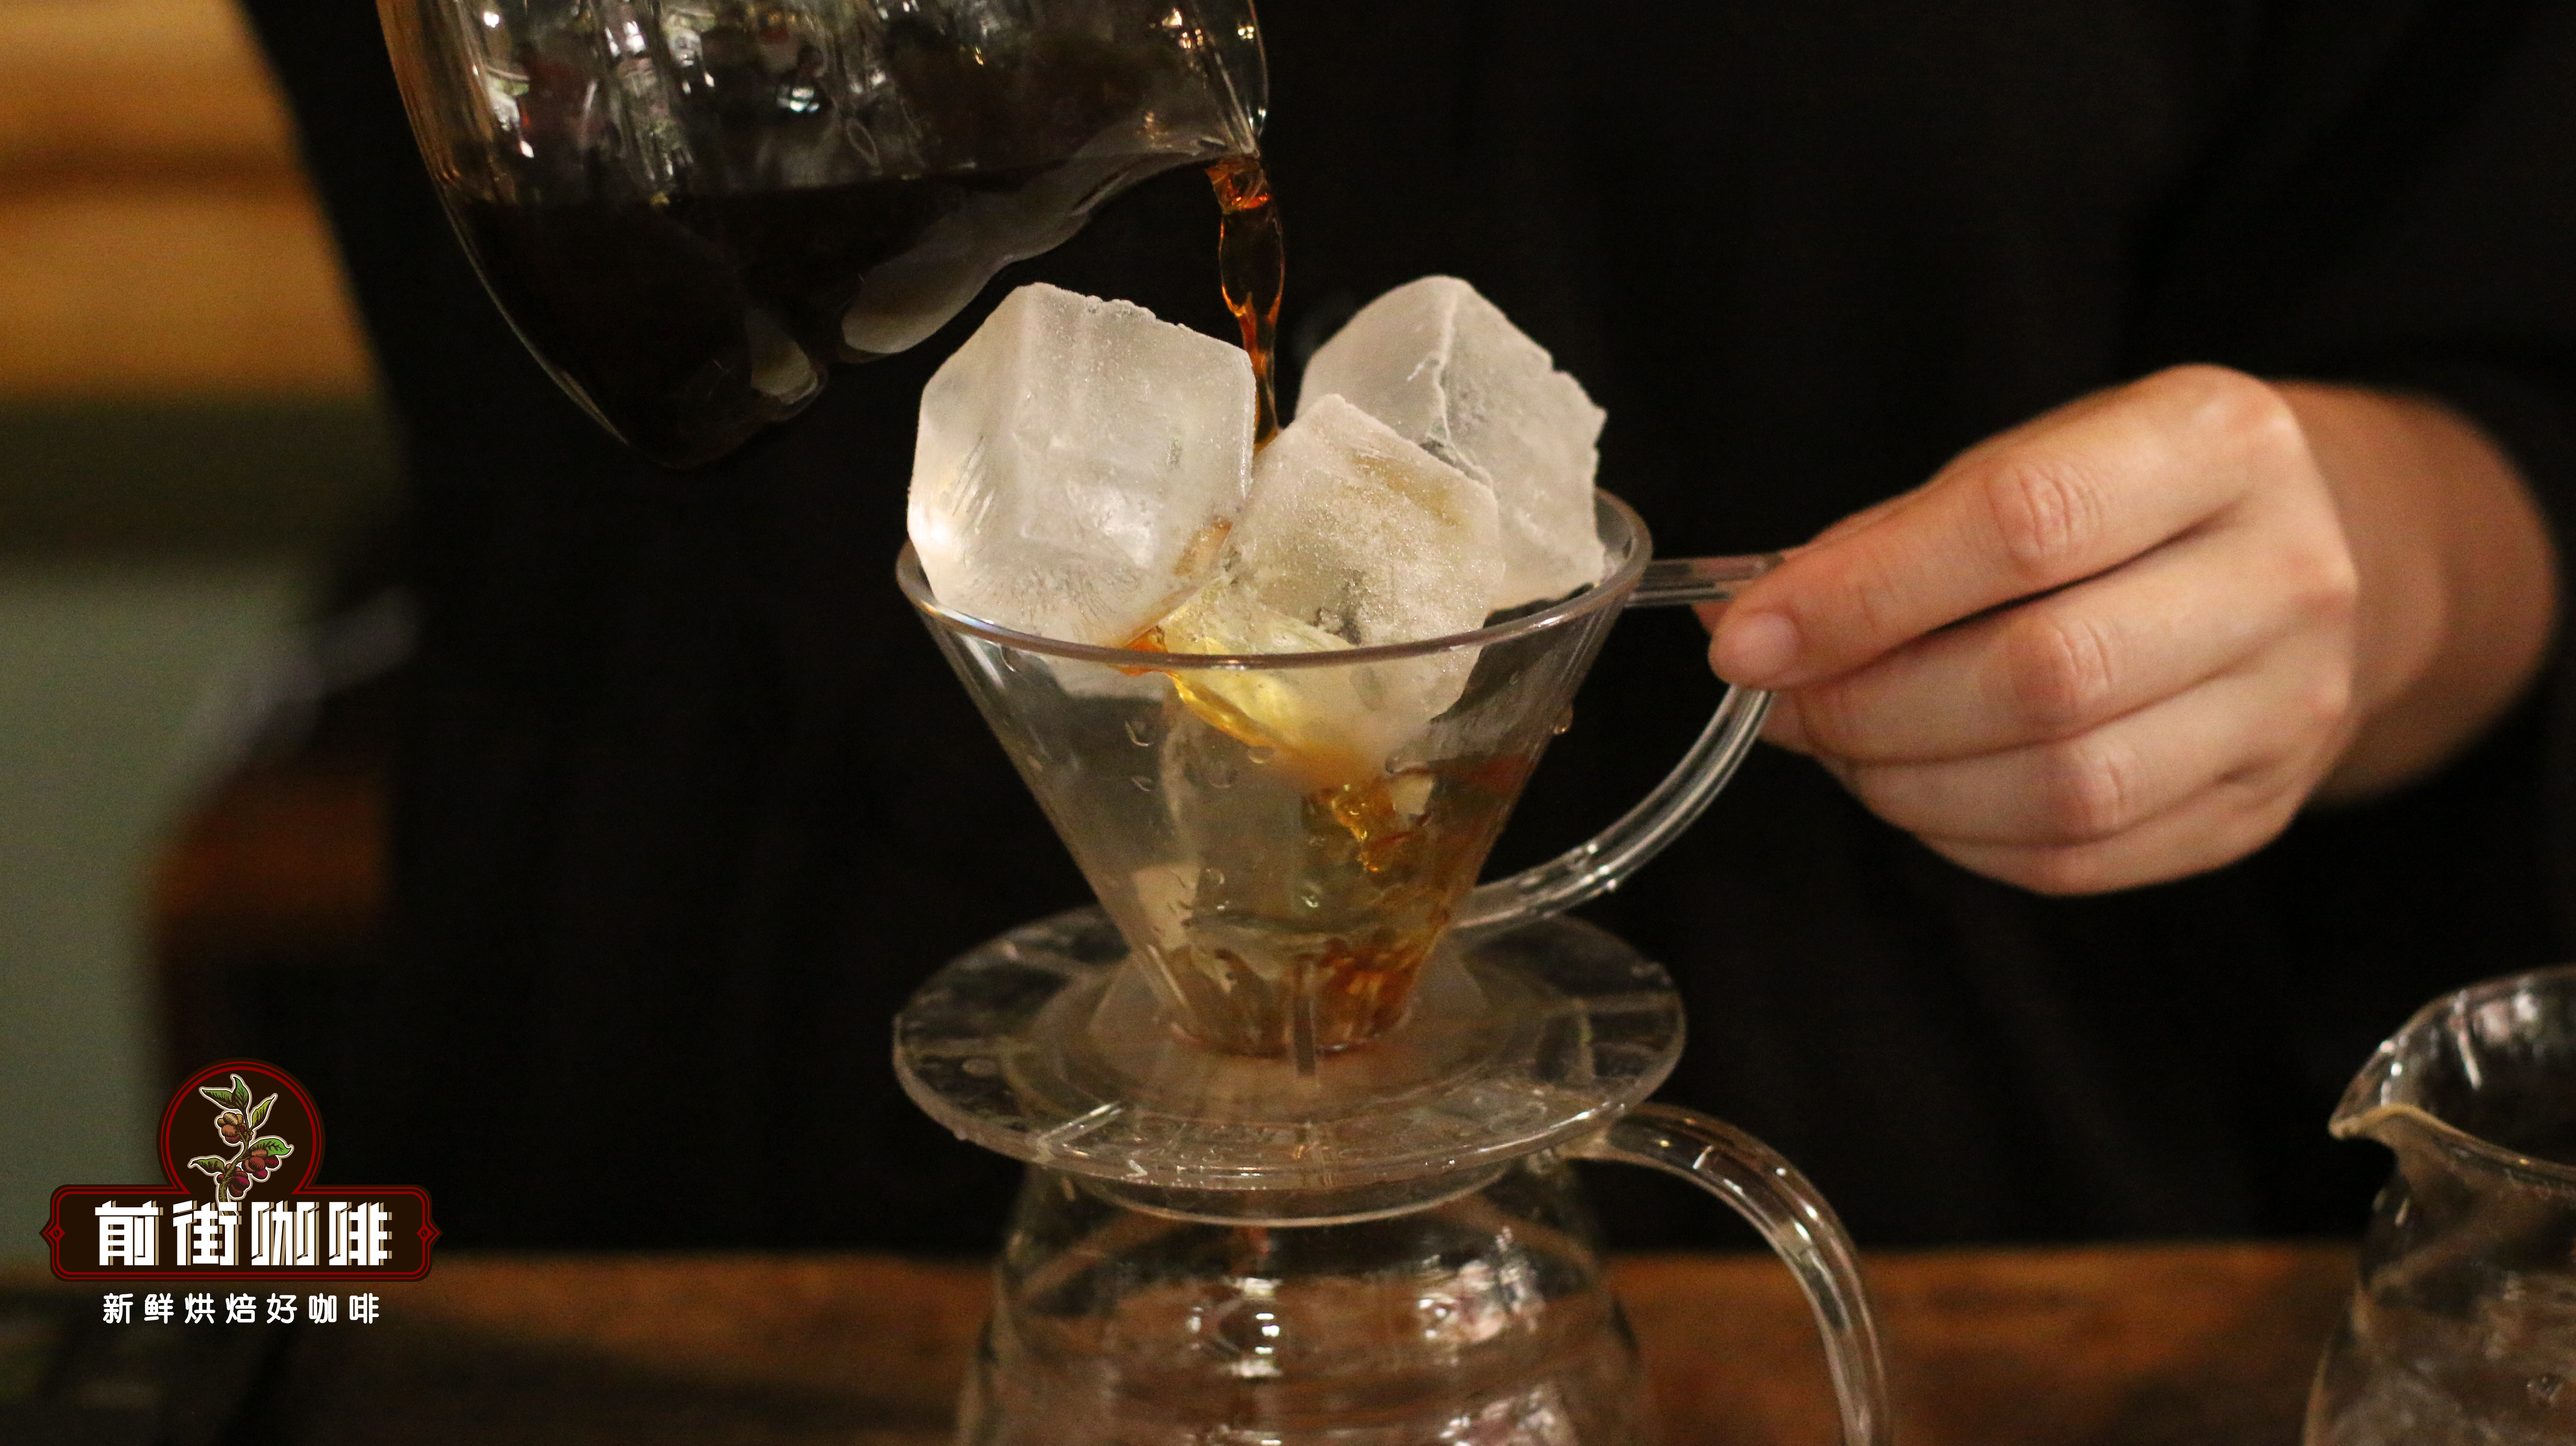 How to improve the extraction of sweetness of iced hand coffee?